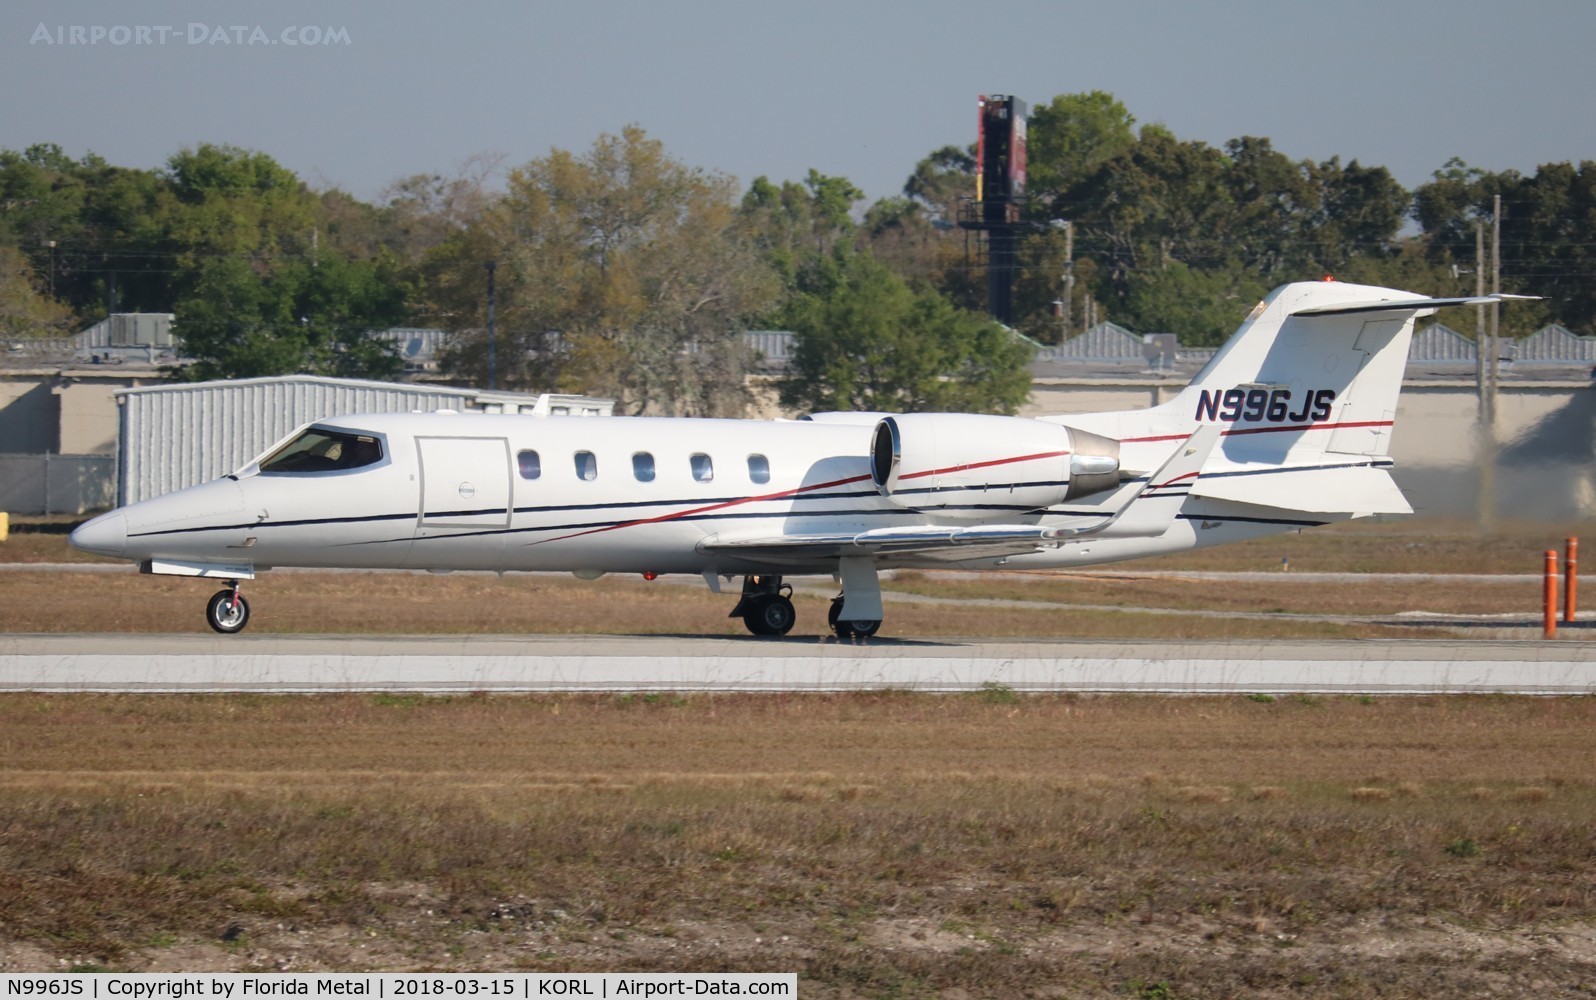 N996JS, 1996 Learjet 31A C/N 31A-119, Lear 31A at ORL